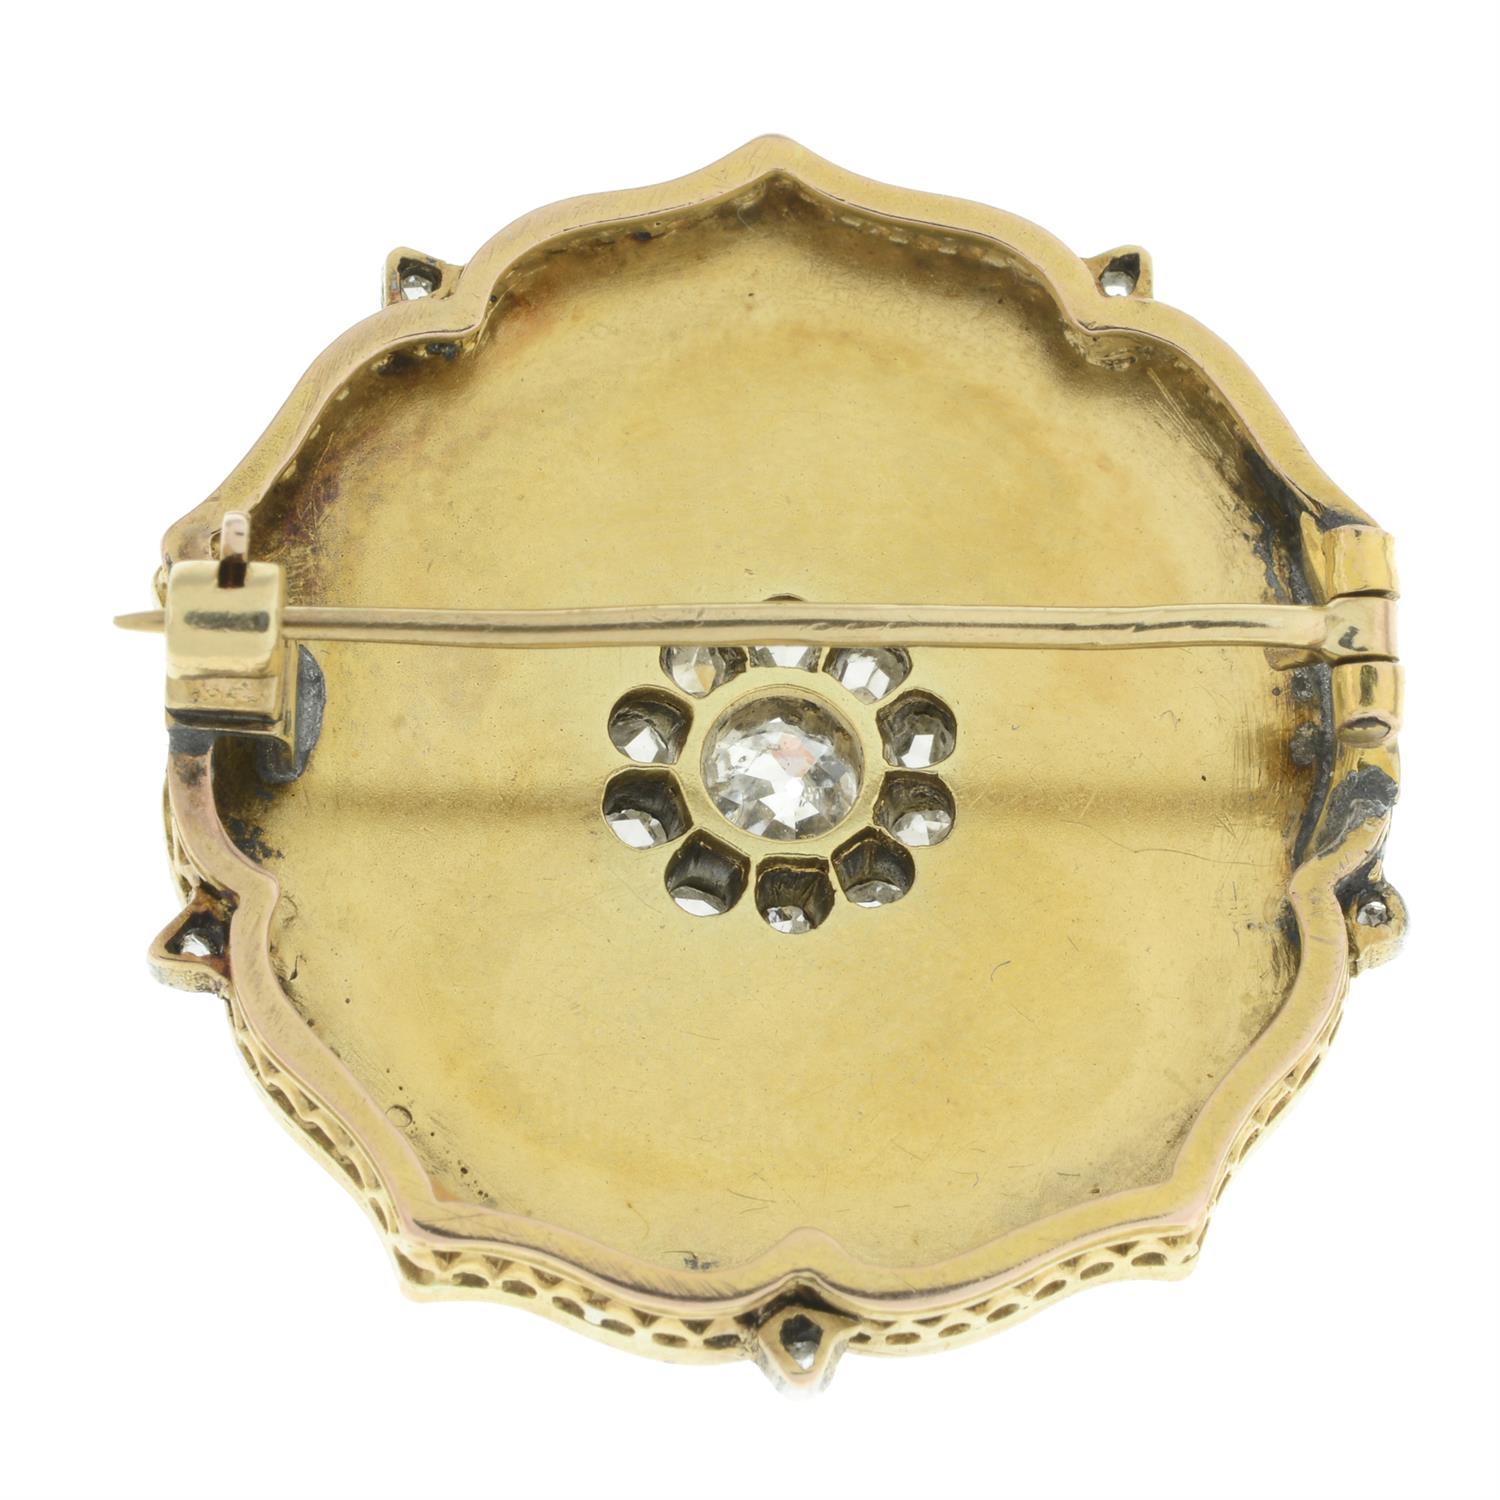 19th century diamond and enamel brooch, attributed to Falize - Image 3 of 4